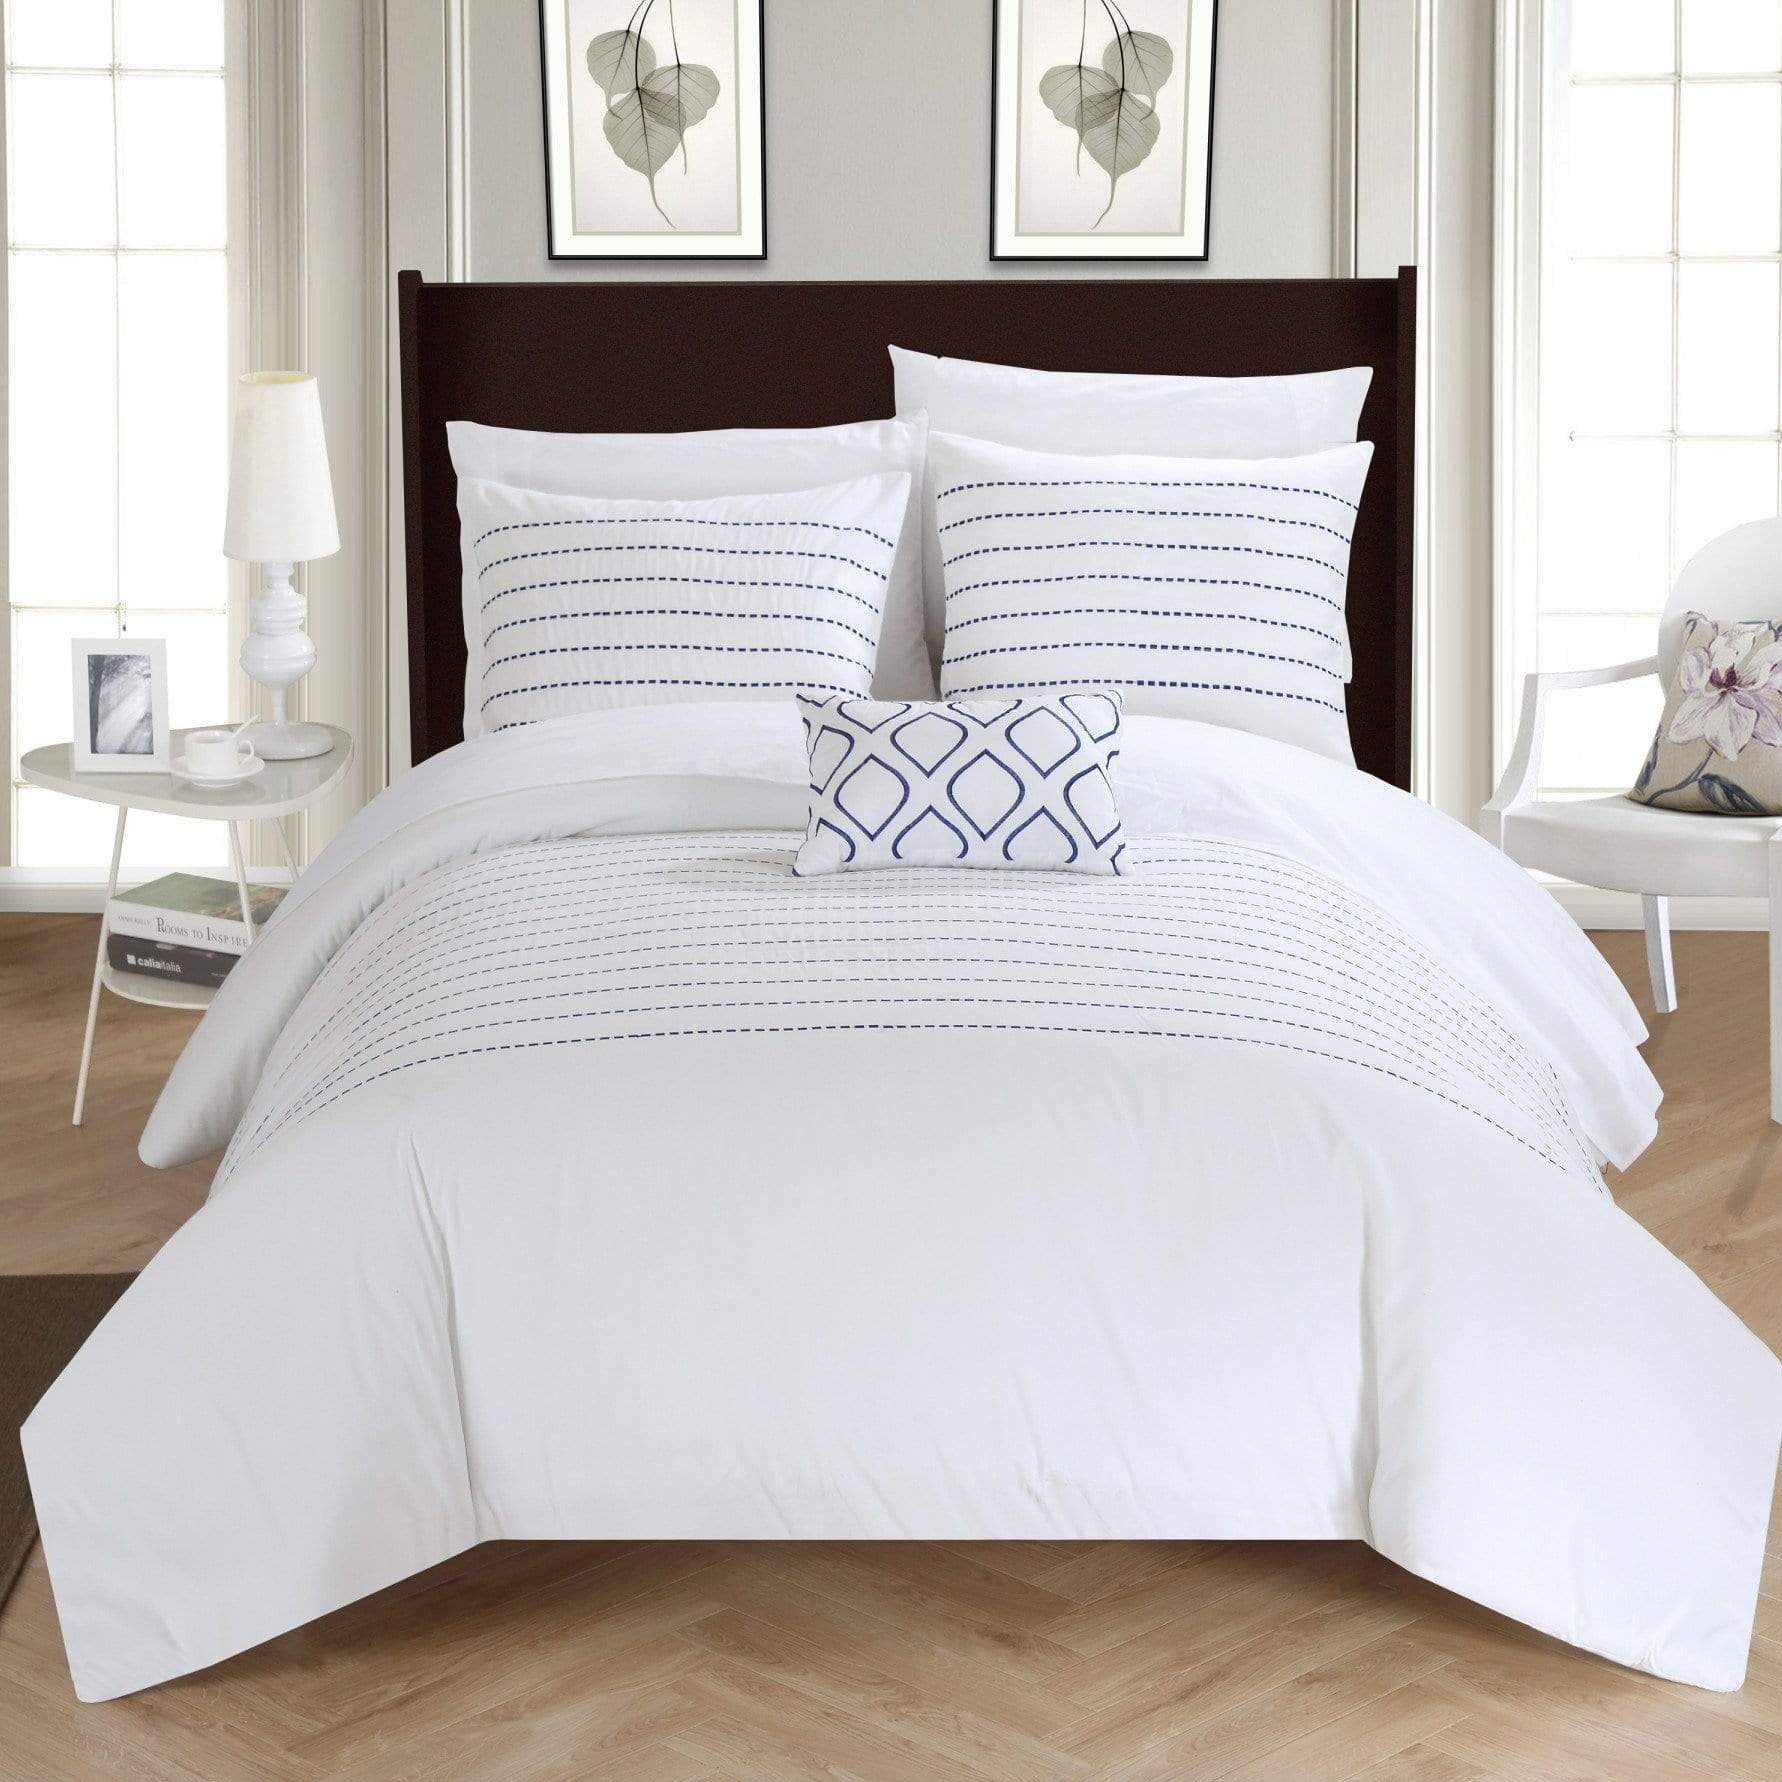 Bea 8 Piece Embroidered Duvet Cover Set